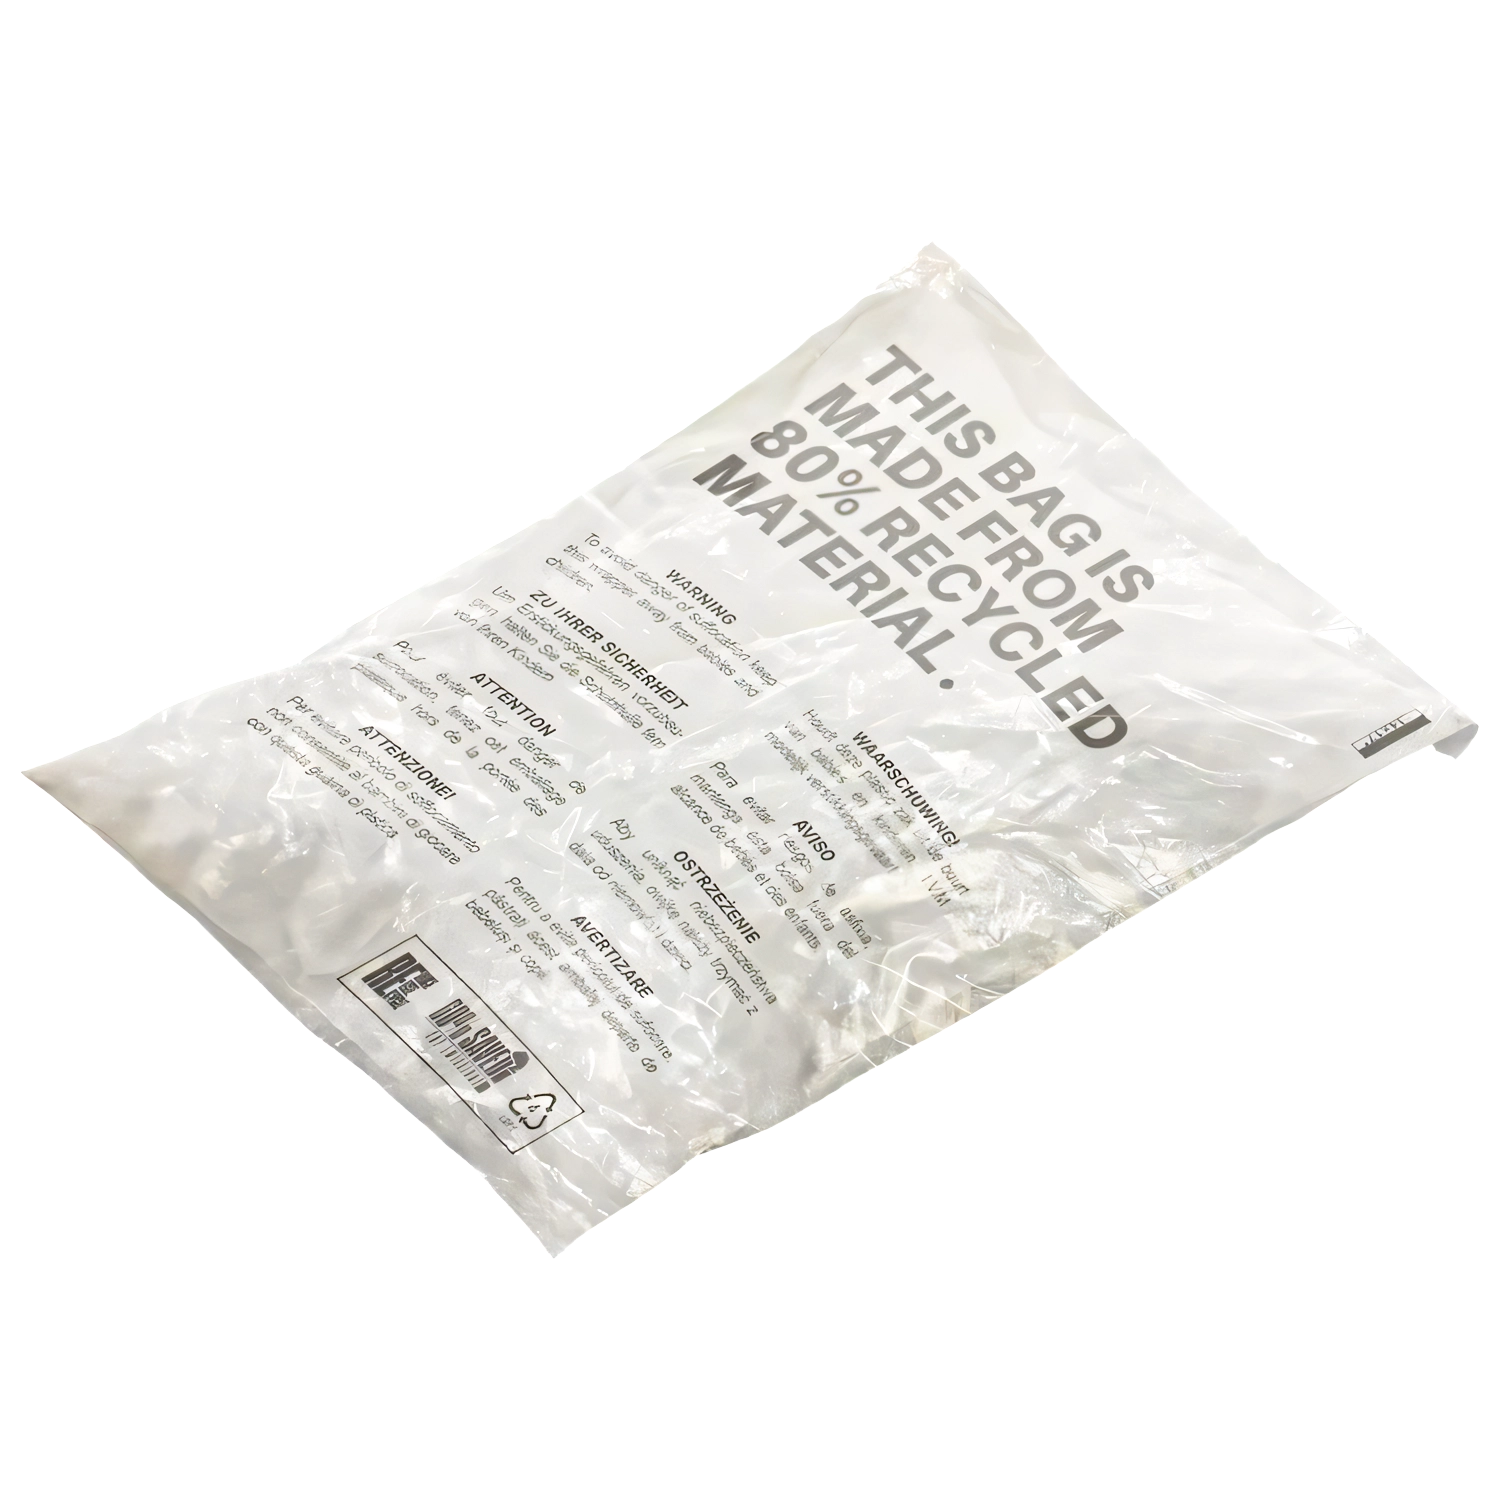 80% Recycled PIR LDPE Mailing Bags - Postal Bags 14x17 Inch